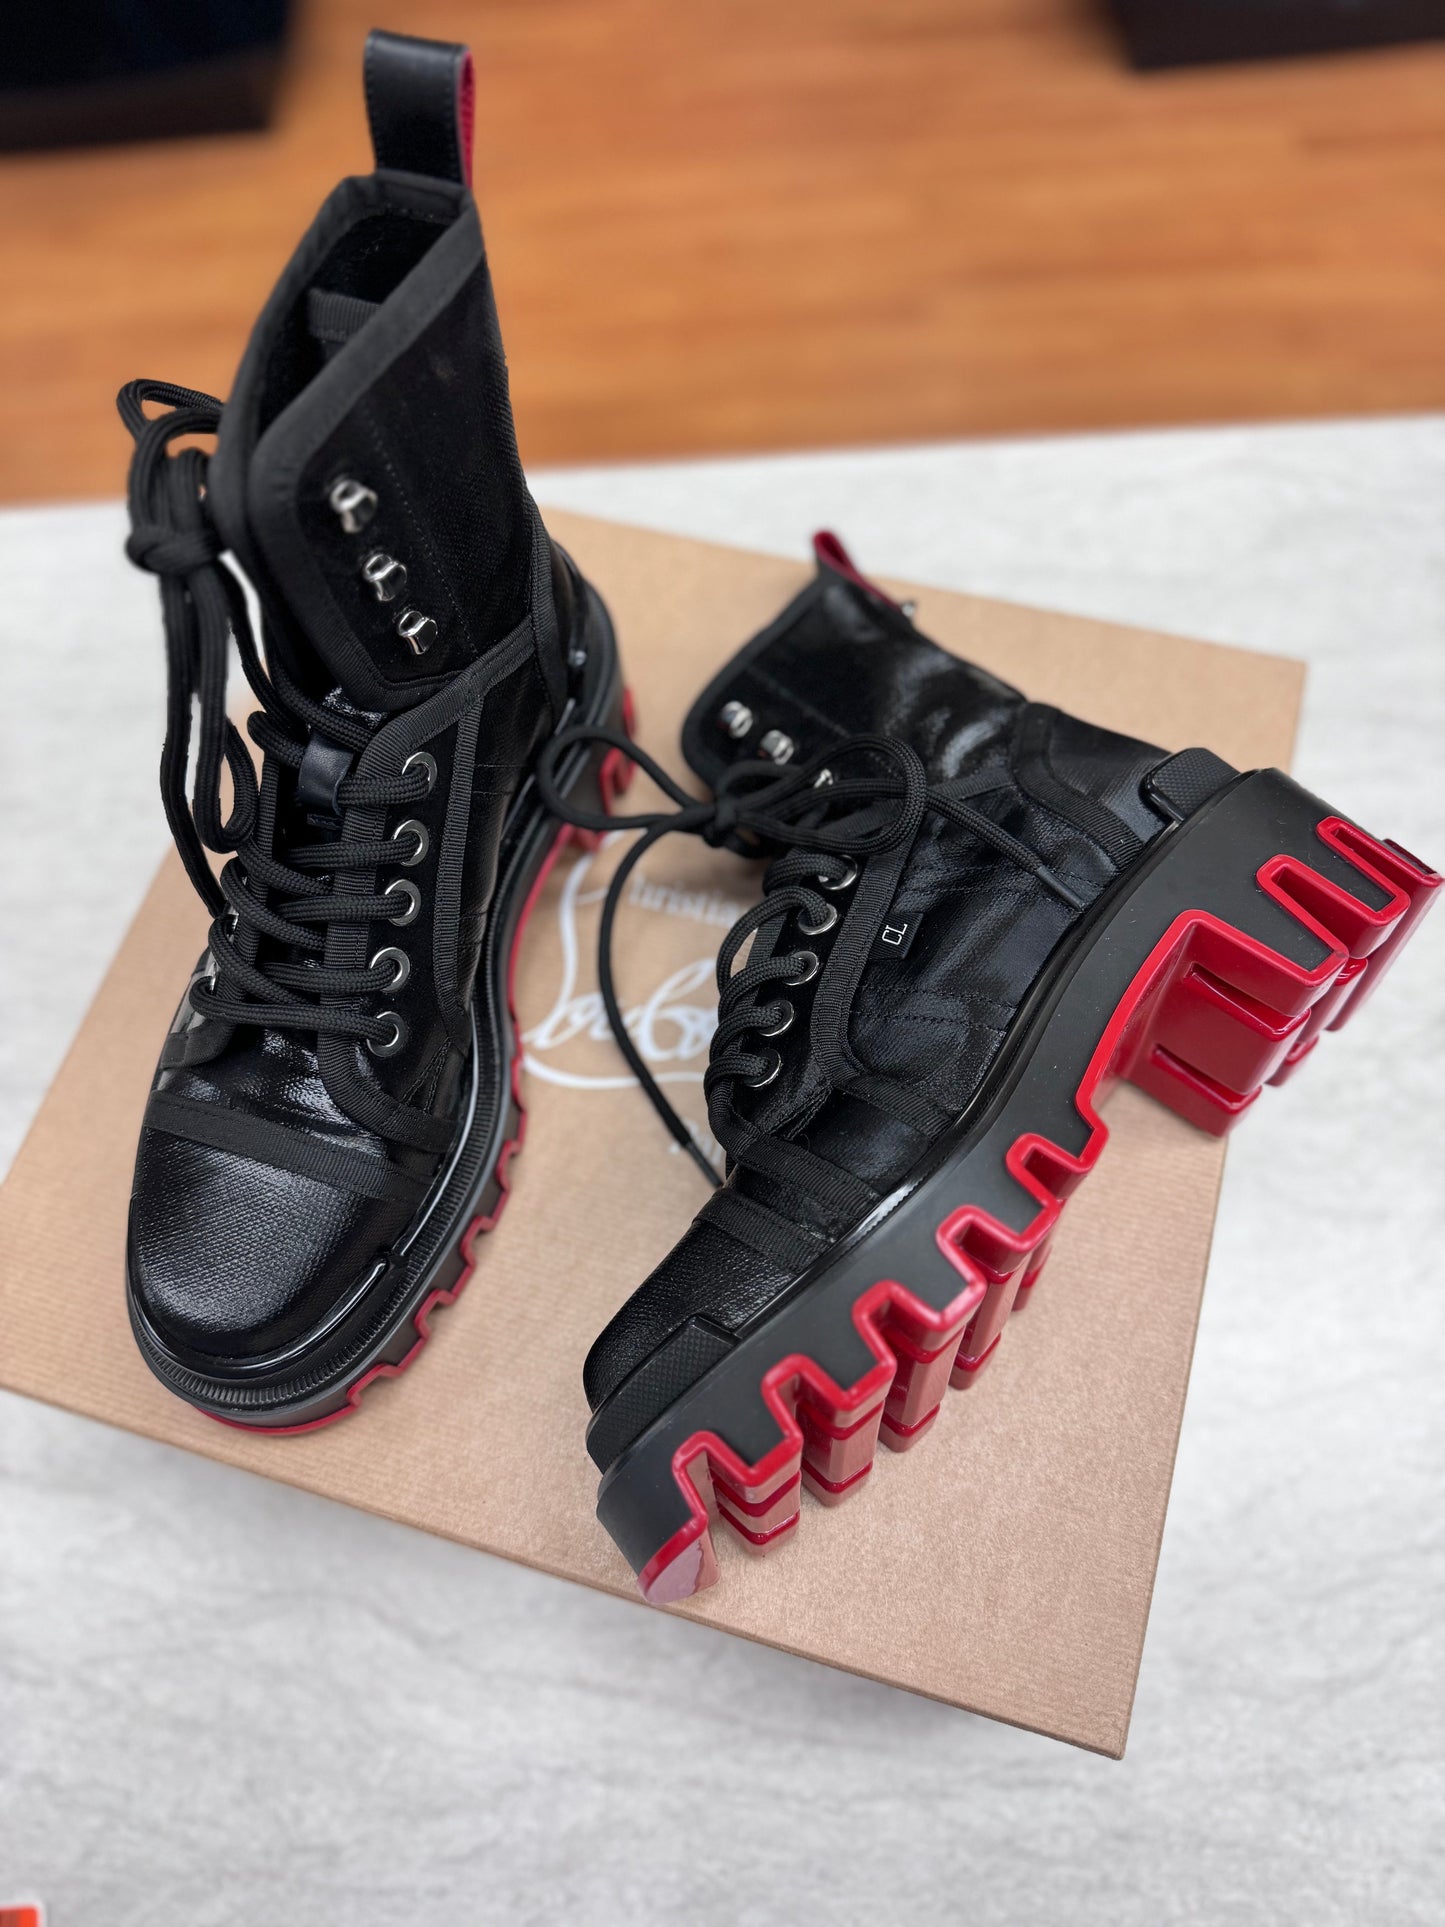 Boots Luxury Designer By Christian Louboutin  Size: 6.5